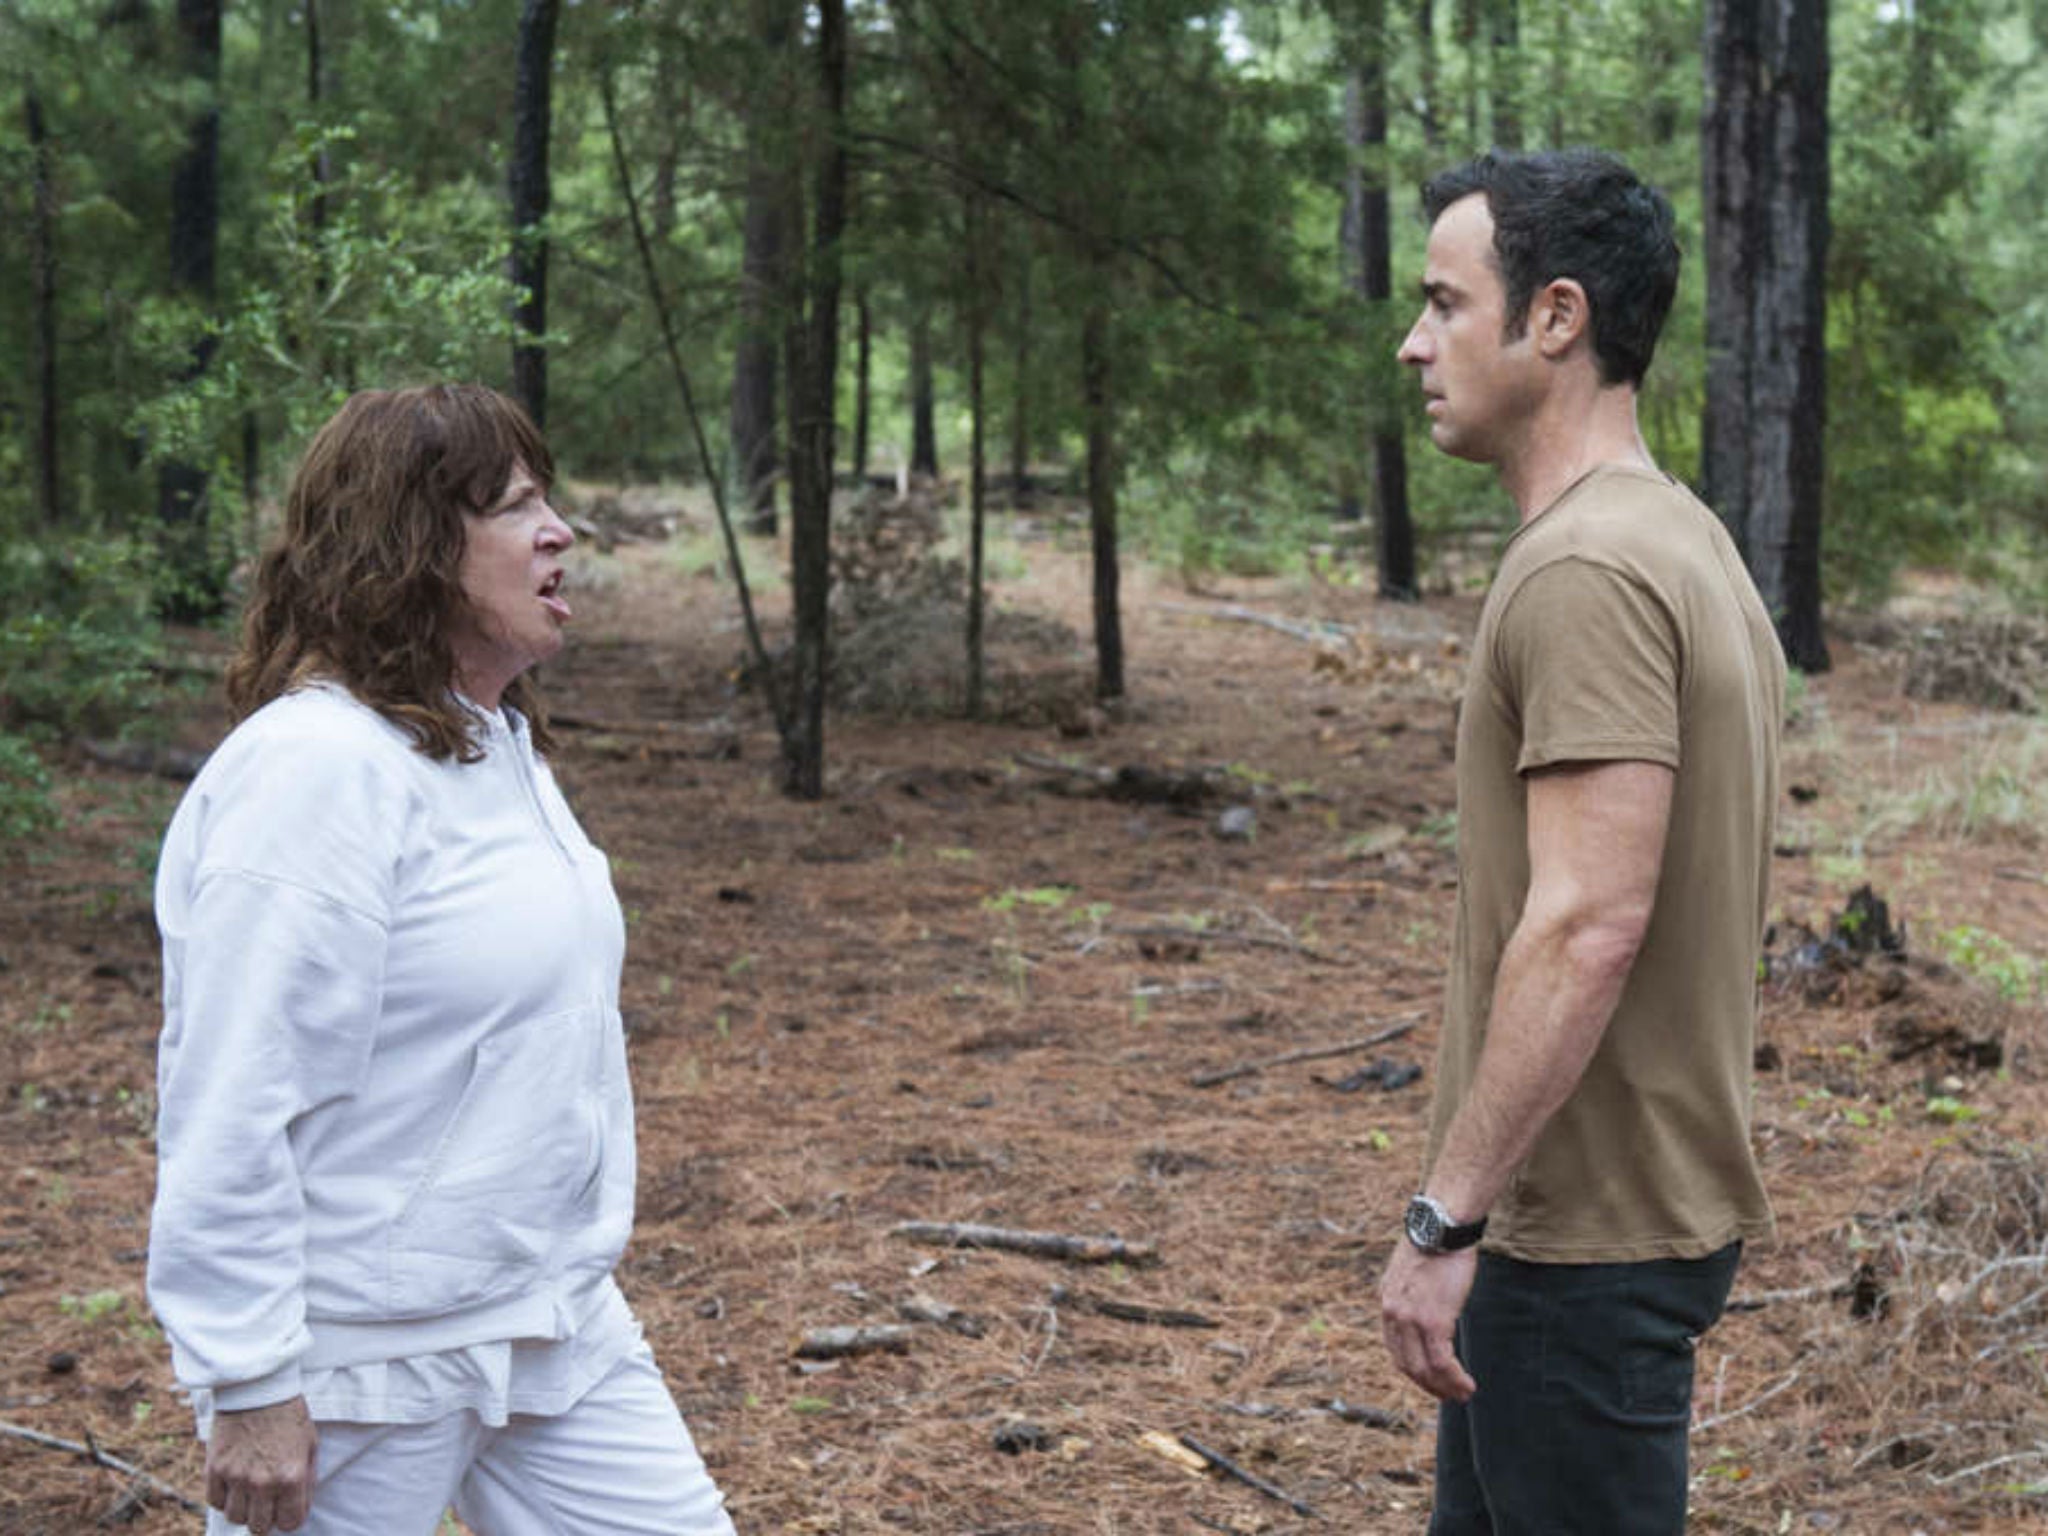 Dowd initially ‘dismissed’ the pilot episode of HBO sleeper hit ‘The Leftovers’